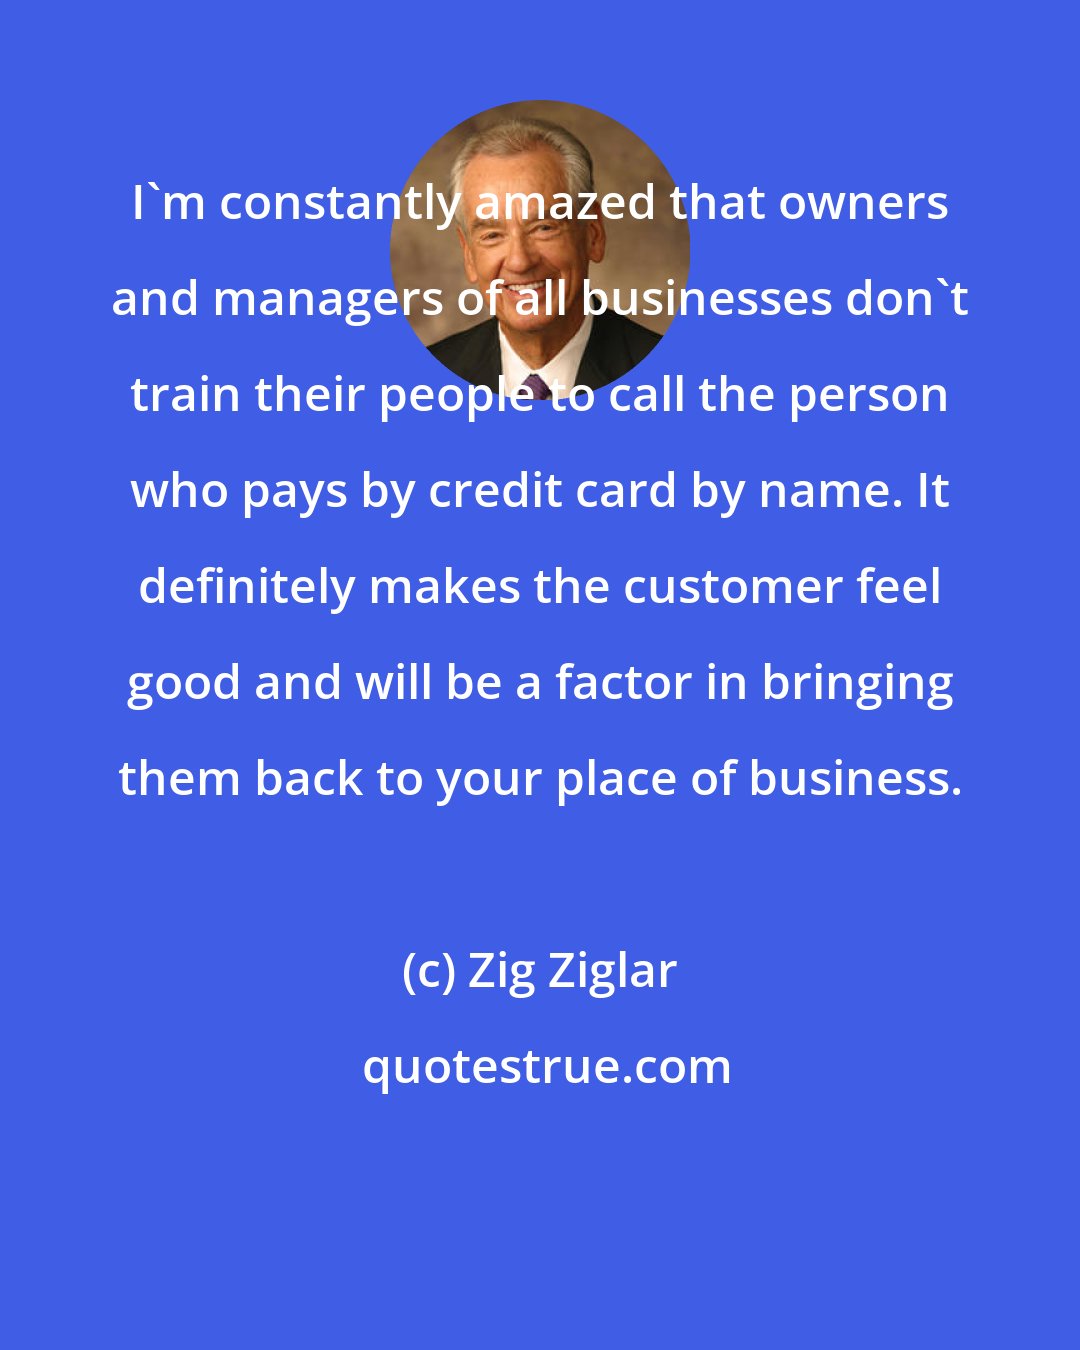 Zig Ziglar: I'm constantly amazed that owners and managers of all businesses don't train their people to call the person who pays by credit card by name. It definitely makes the customer feel good and will be a factor in bringing them back to your place of business.